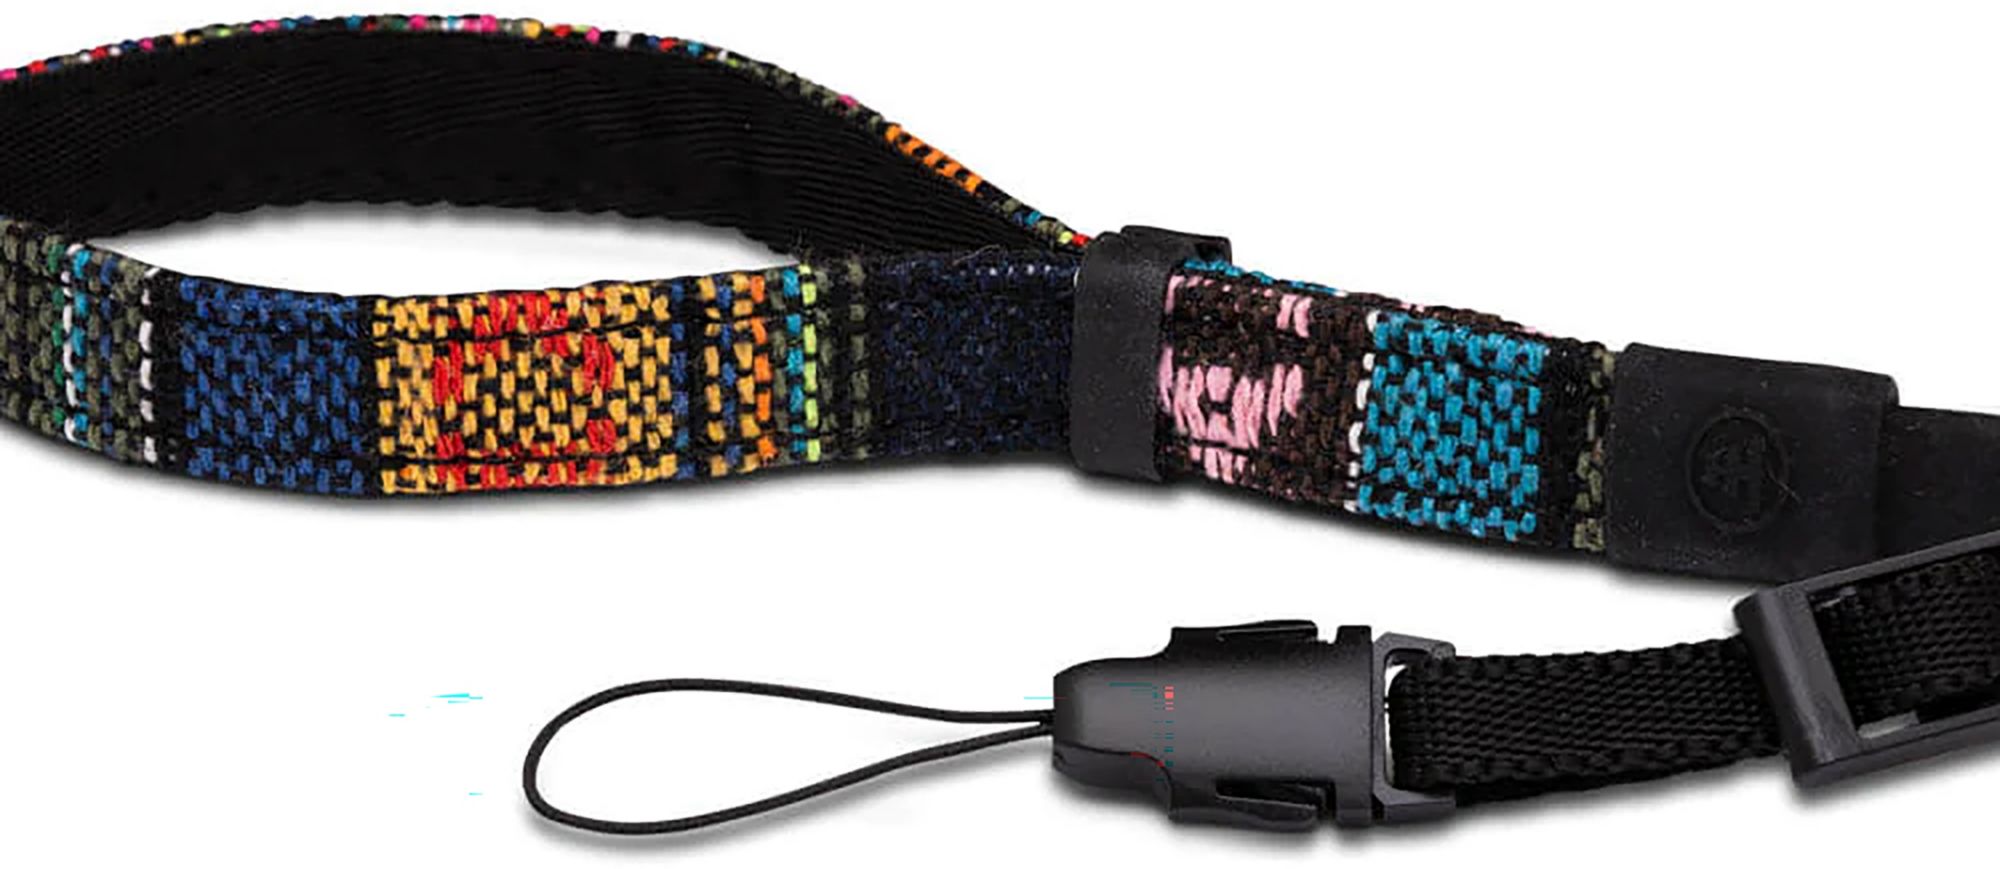 Photos - Other Nocs Provisions Woven Wrist Strap 23KGZUWVNWRSTSTRPOPT